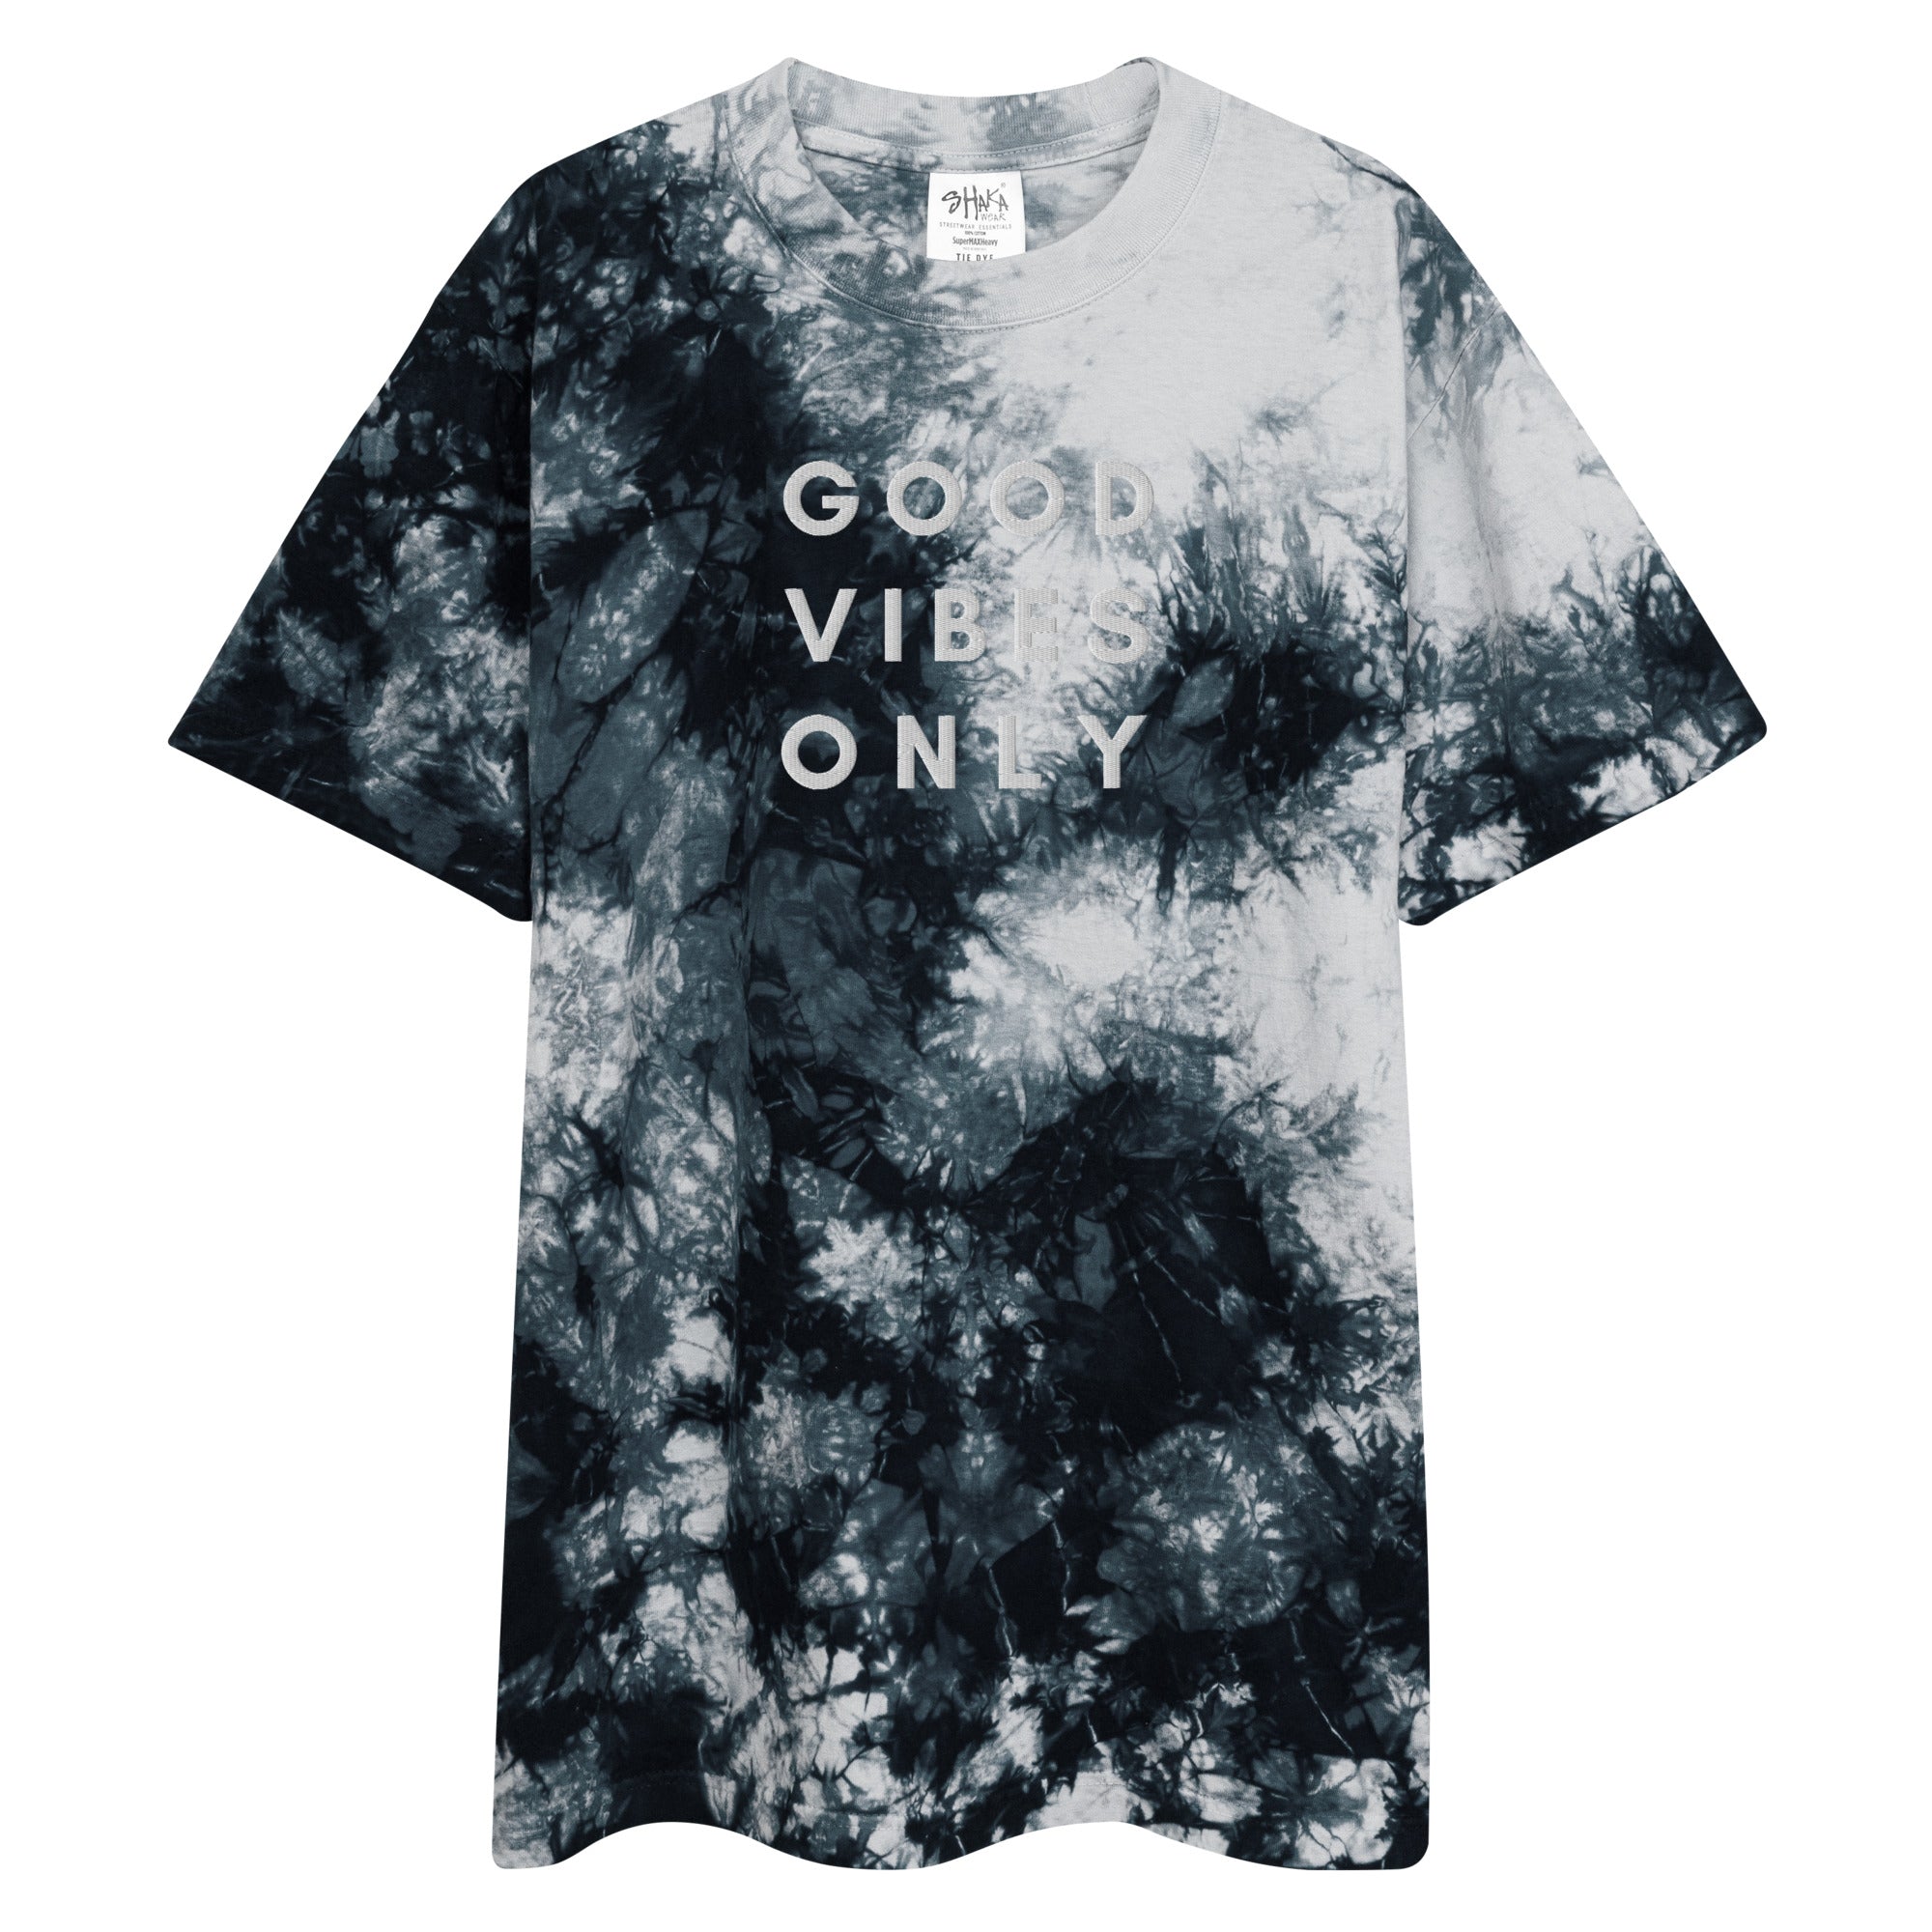 Good Vibes Only Oversized Tie-Dye T-Shirt (White Embroidery)